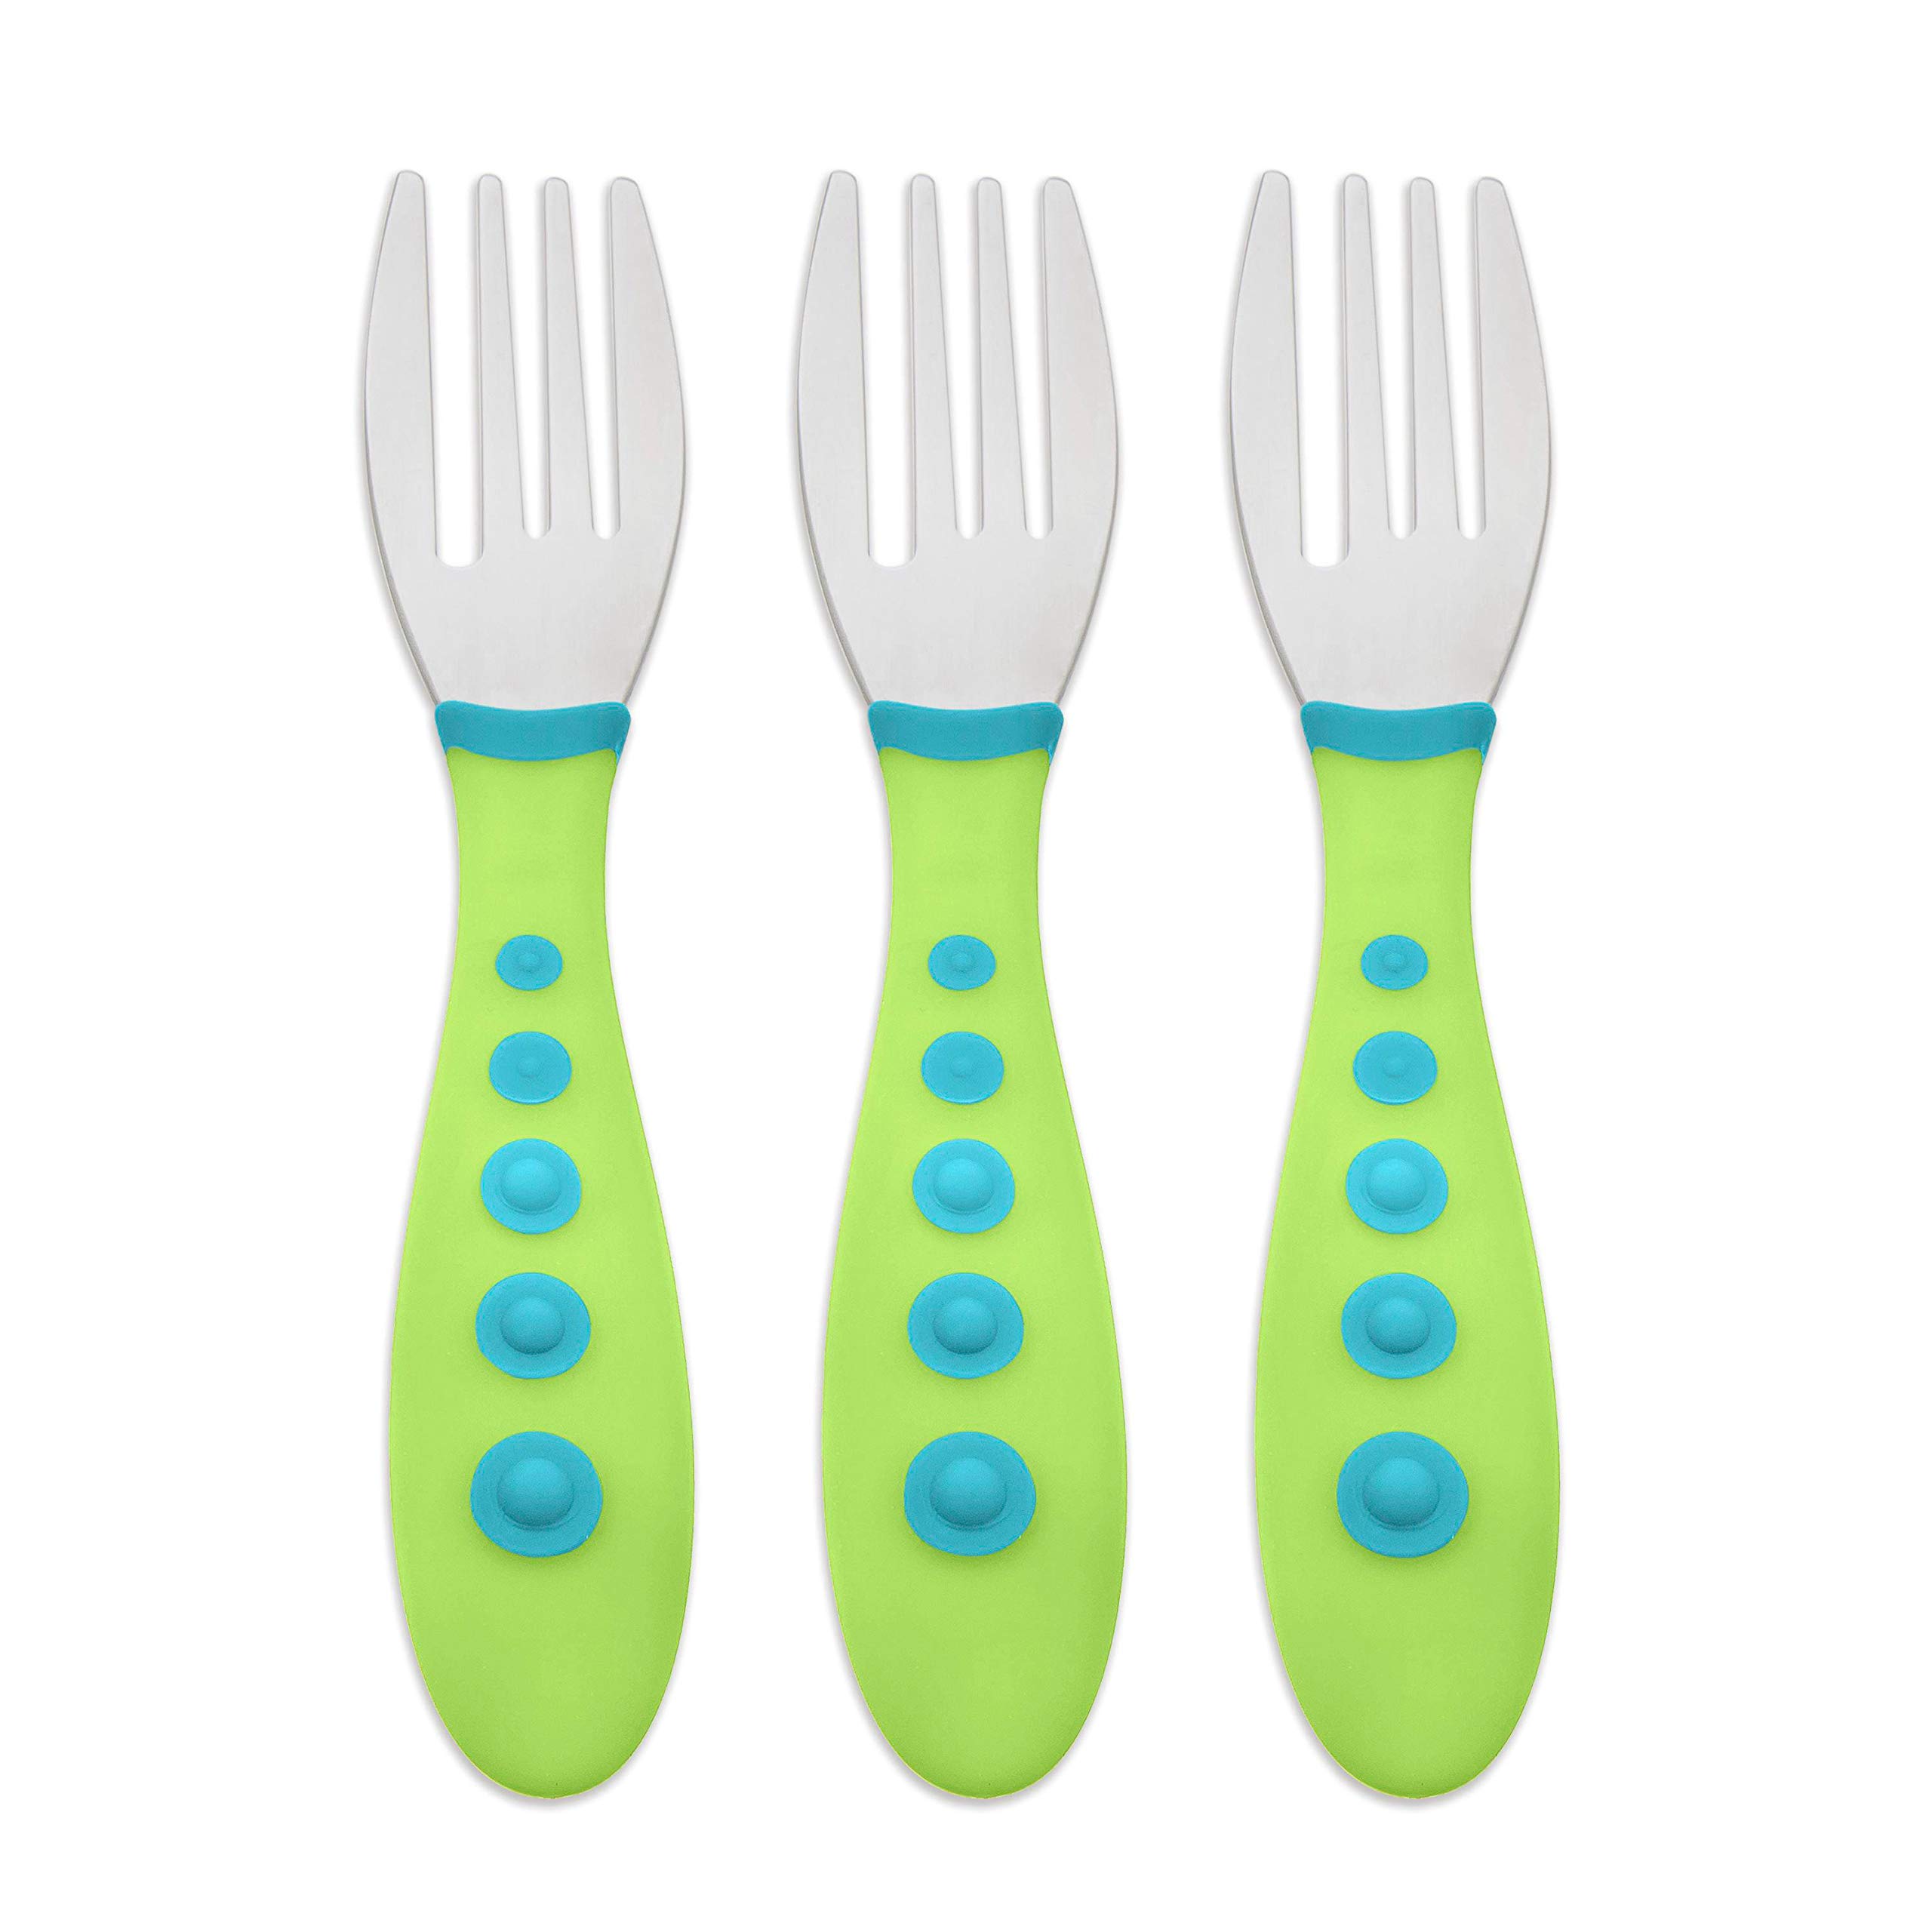 NUK First Essentials Kiddy Cutlery Forks, 3-Count (Color May Vary)